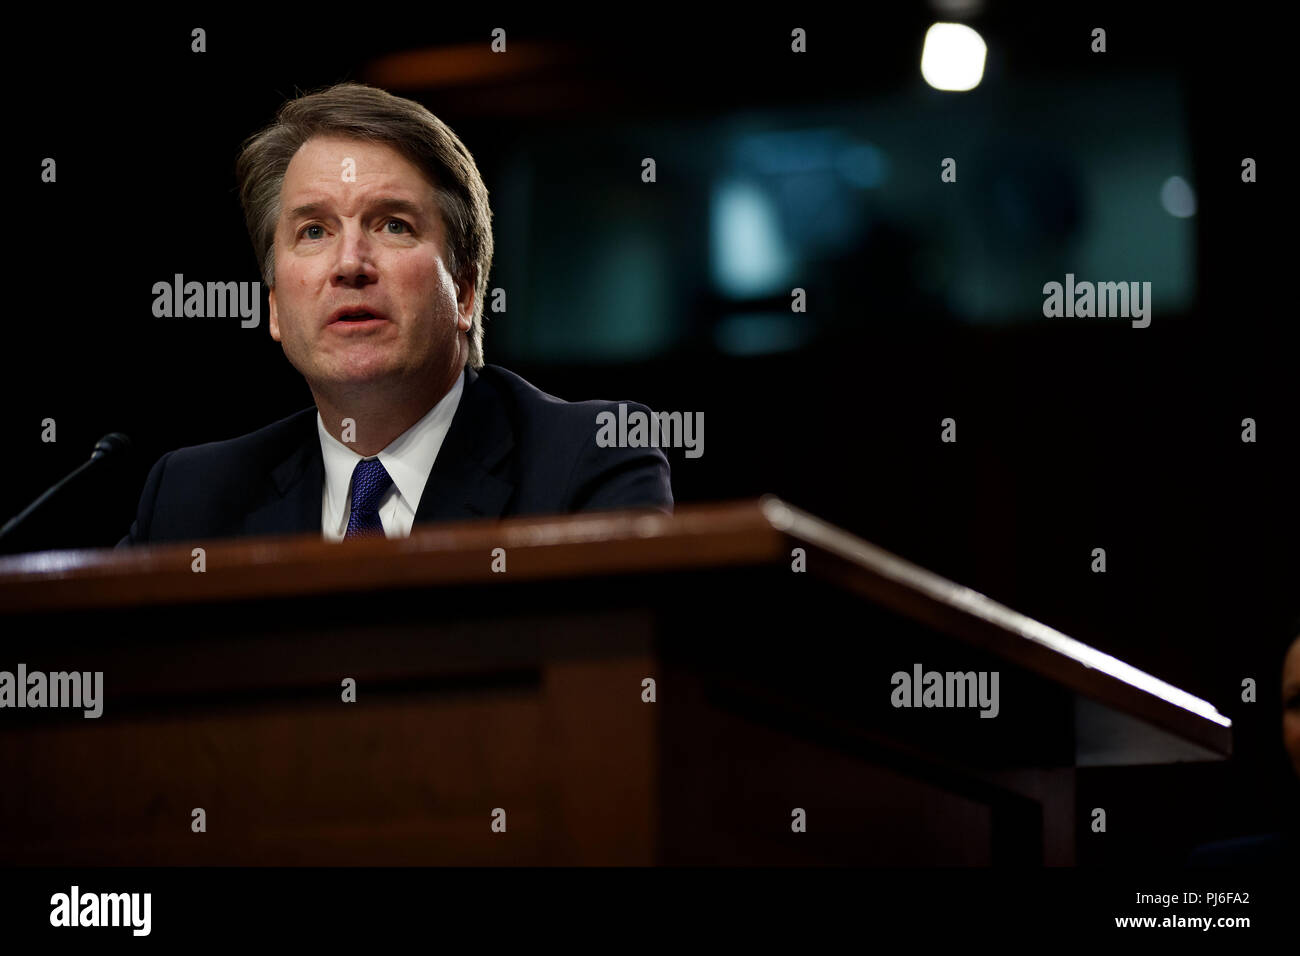 Washington, USA. 4th Sep, 2018. U.S. Supreme Court nominee Judge Brett Kavanaugh speaks during his Senate confirmation hearing on Capitol Hill in Washington, DC, the United States, Sept. 4, 2018. The Senate confirmation hearing for Kavanaugh began Tuesday, which has descended into chaos as Democrats protested about Republicans blocking access to documents concerning the judge. Credit: Ting Shen/Xinhua/Alamy Live News Stock Photo